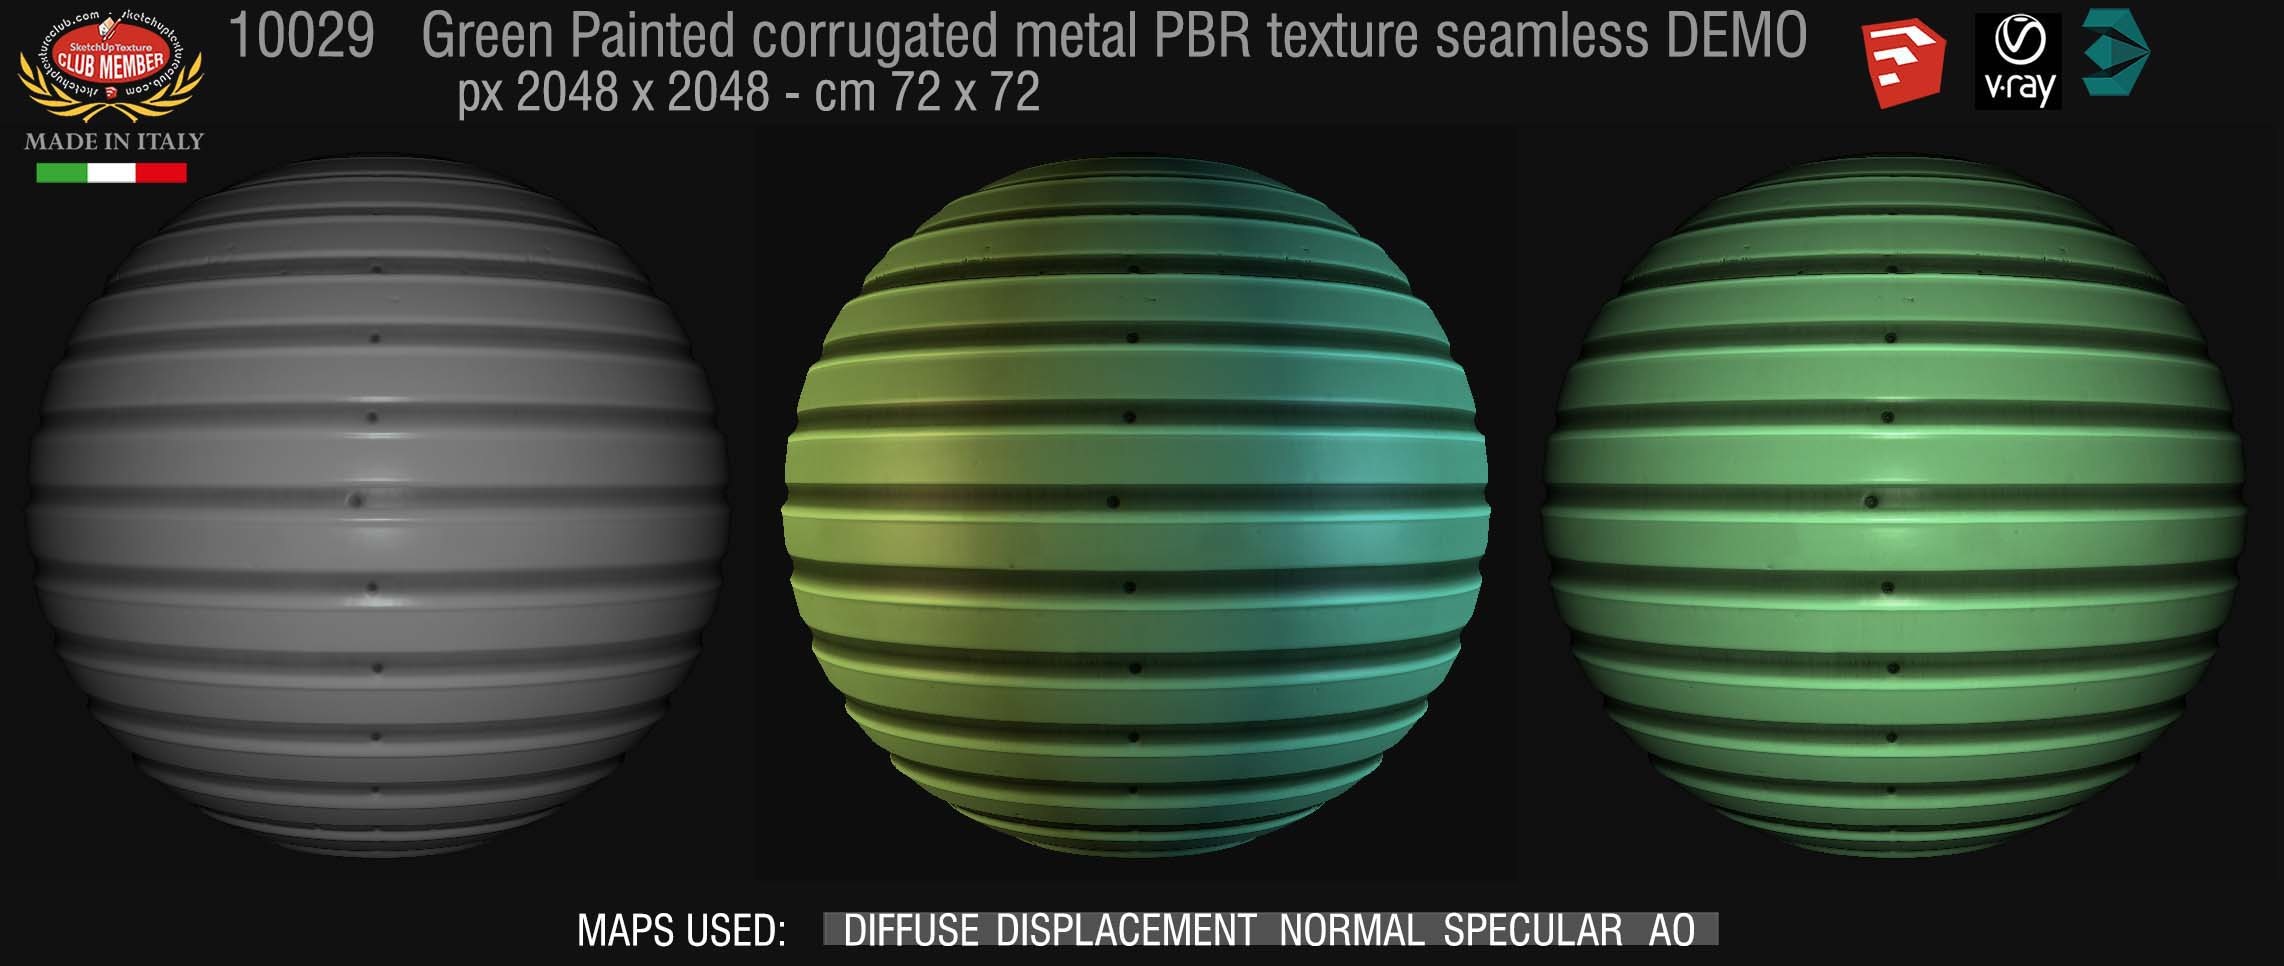 10029 Green painted corrugated metal PBR texture seamless DEMO